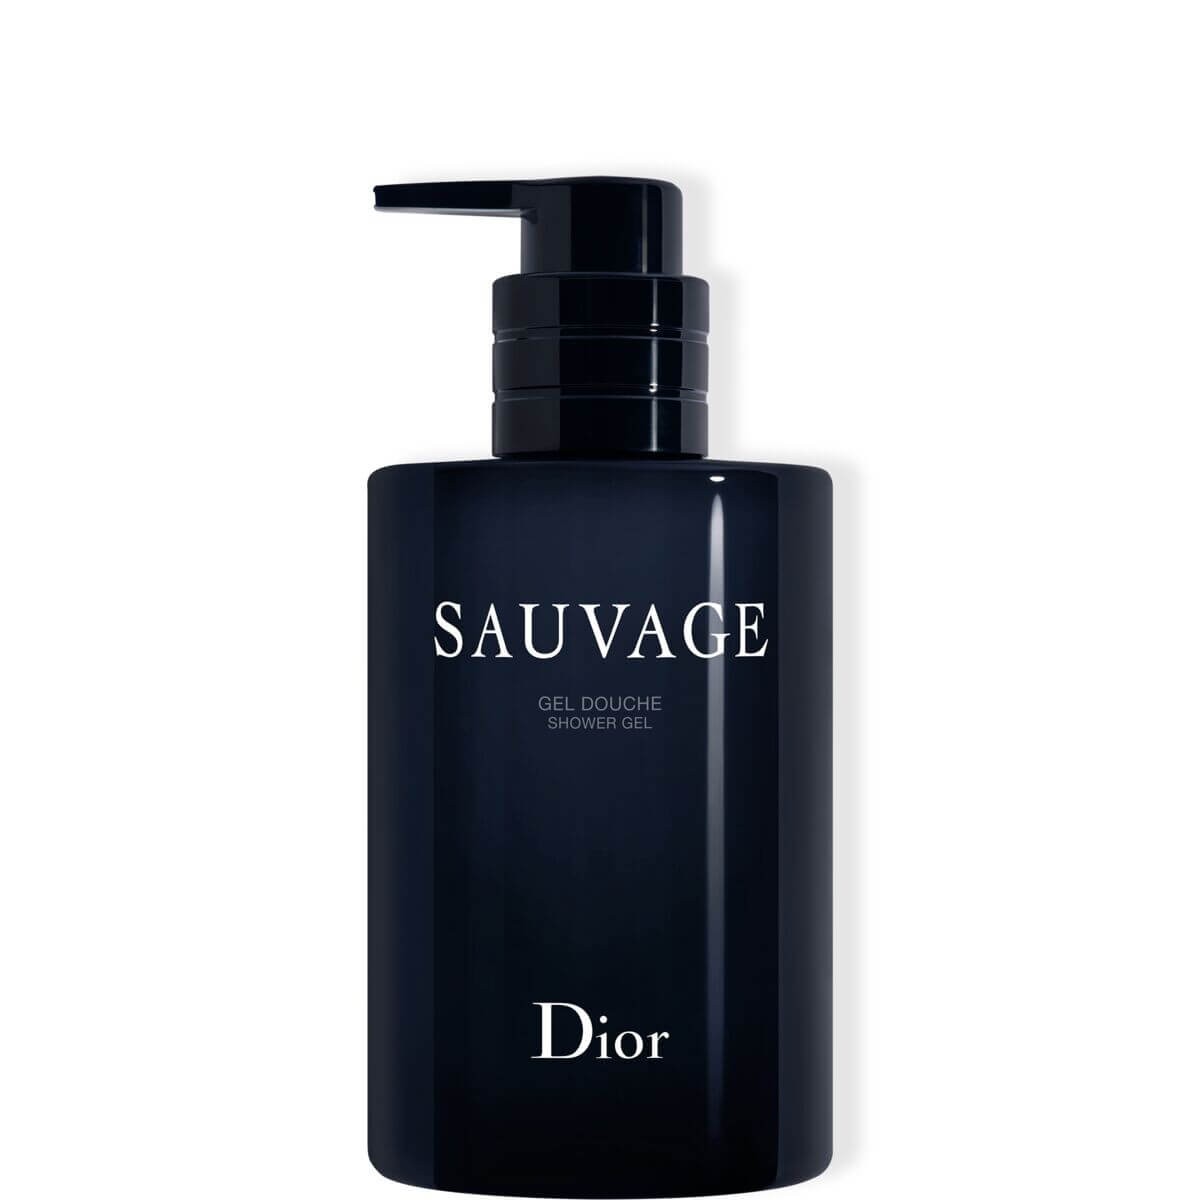 DIOR - Sauvage Shower Gel For The Body - 